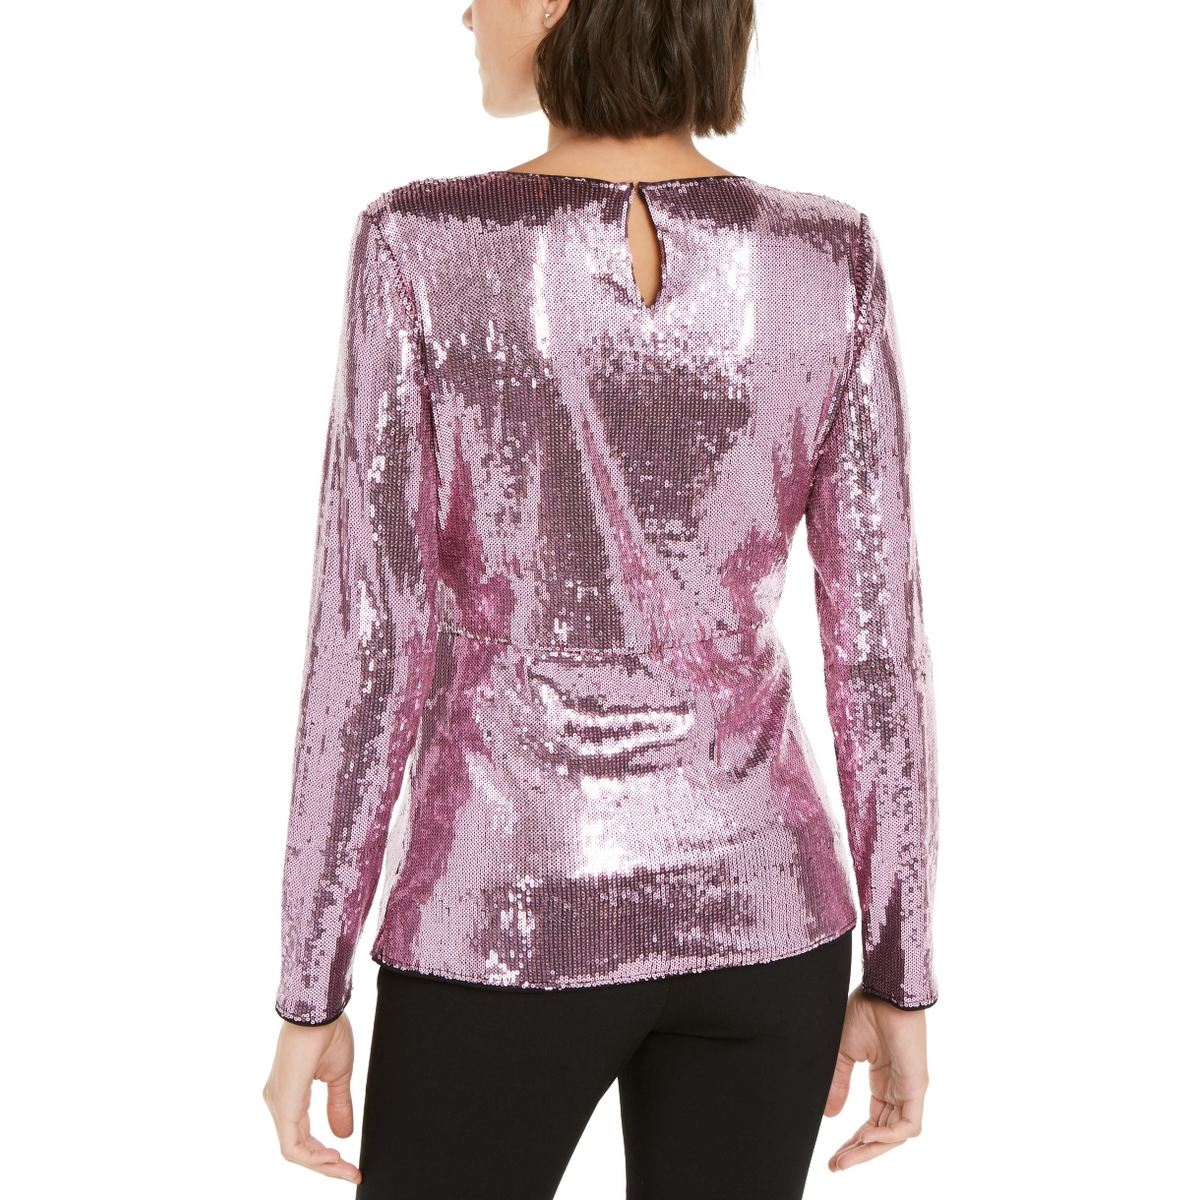 INC NEW Women/'s Twisted-front Sequined Party Blouse Shirt Top TEDO